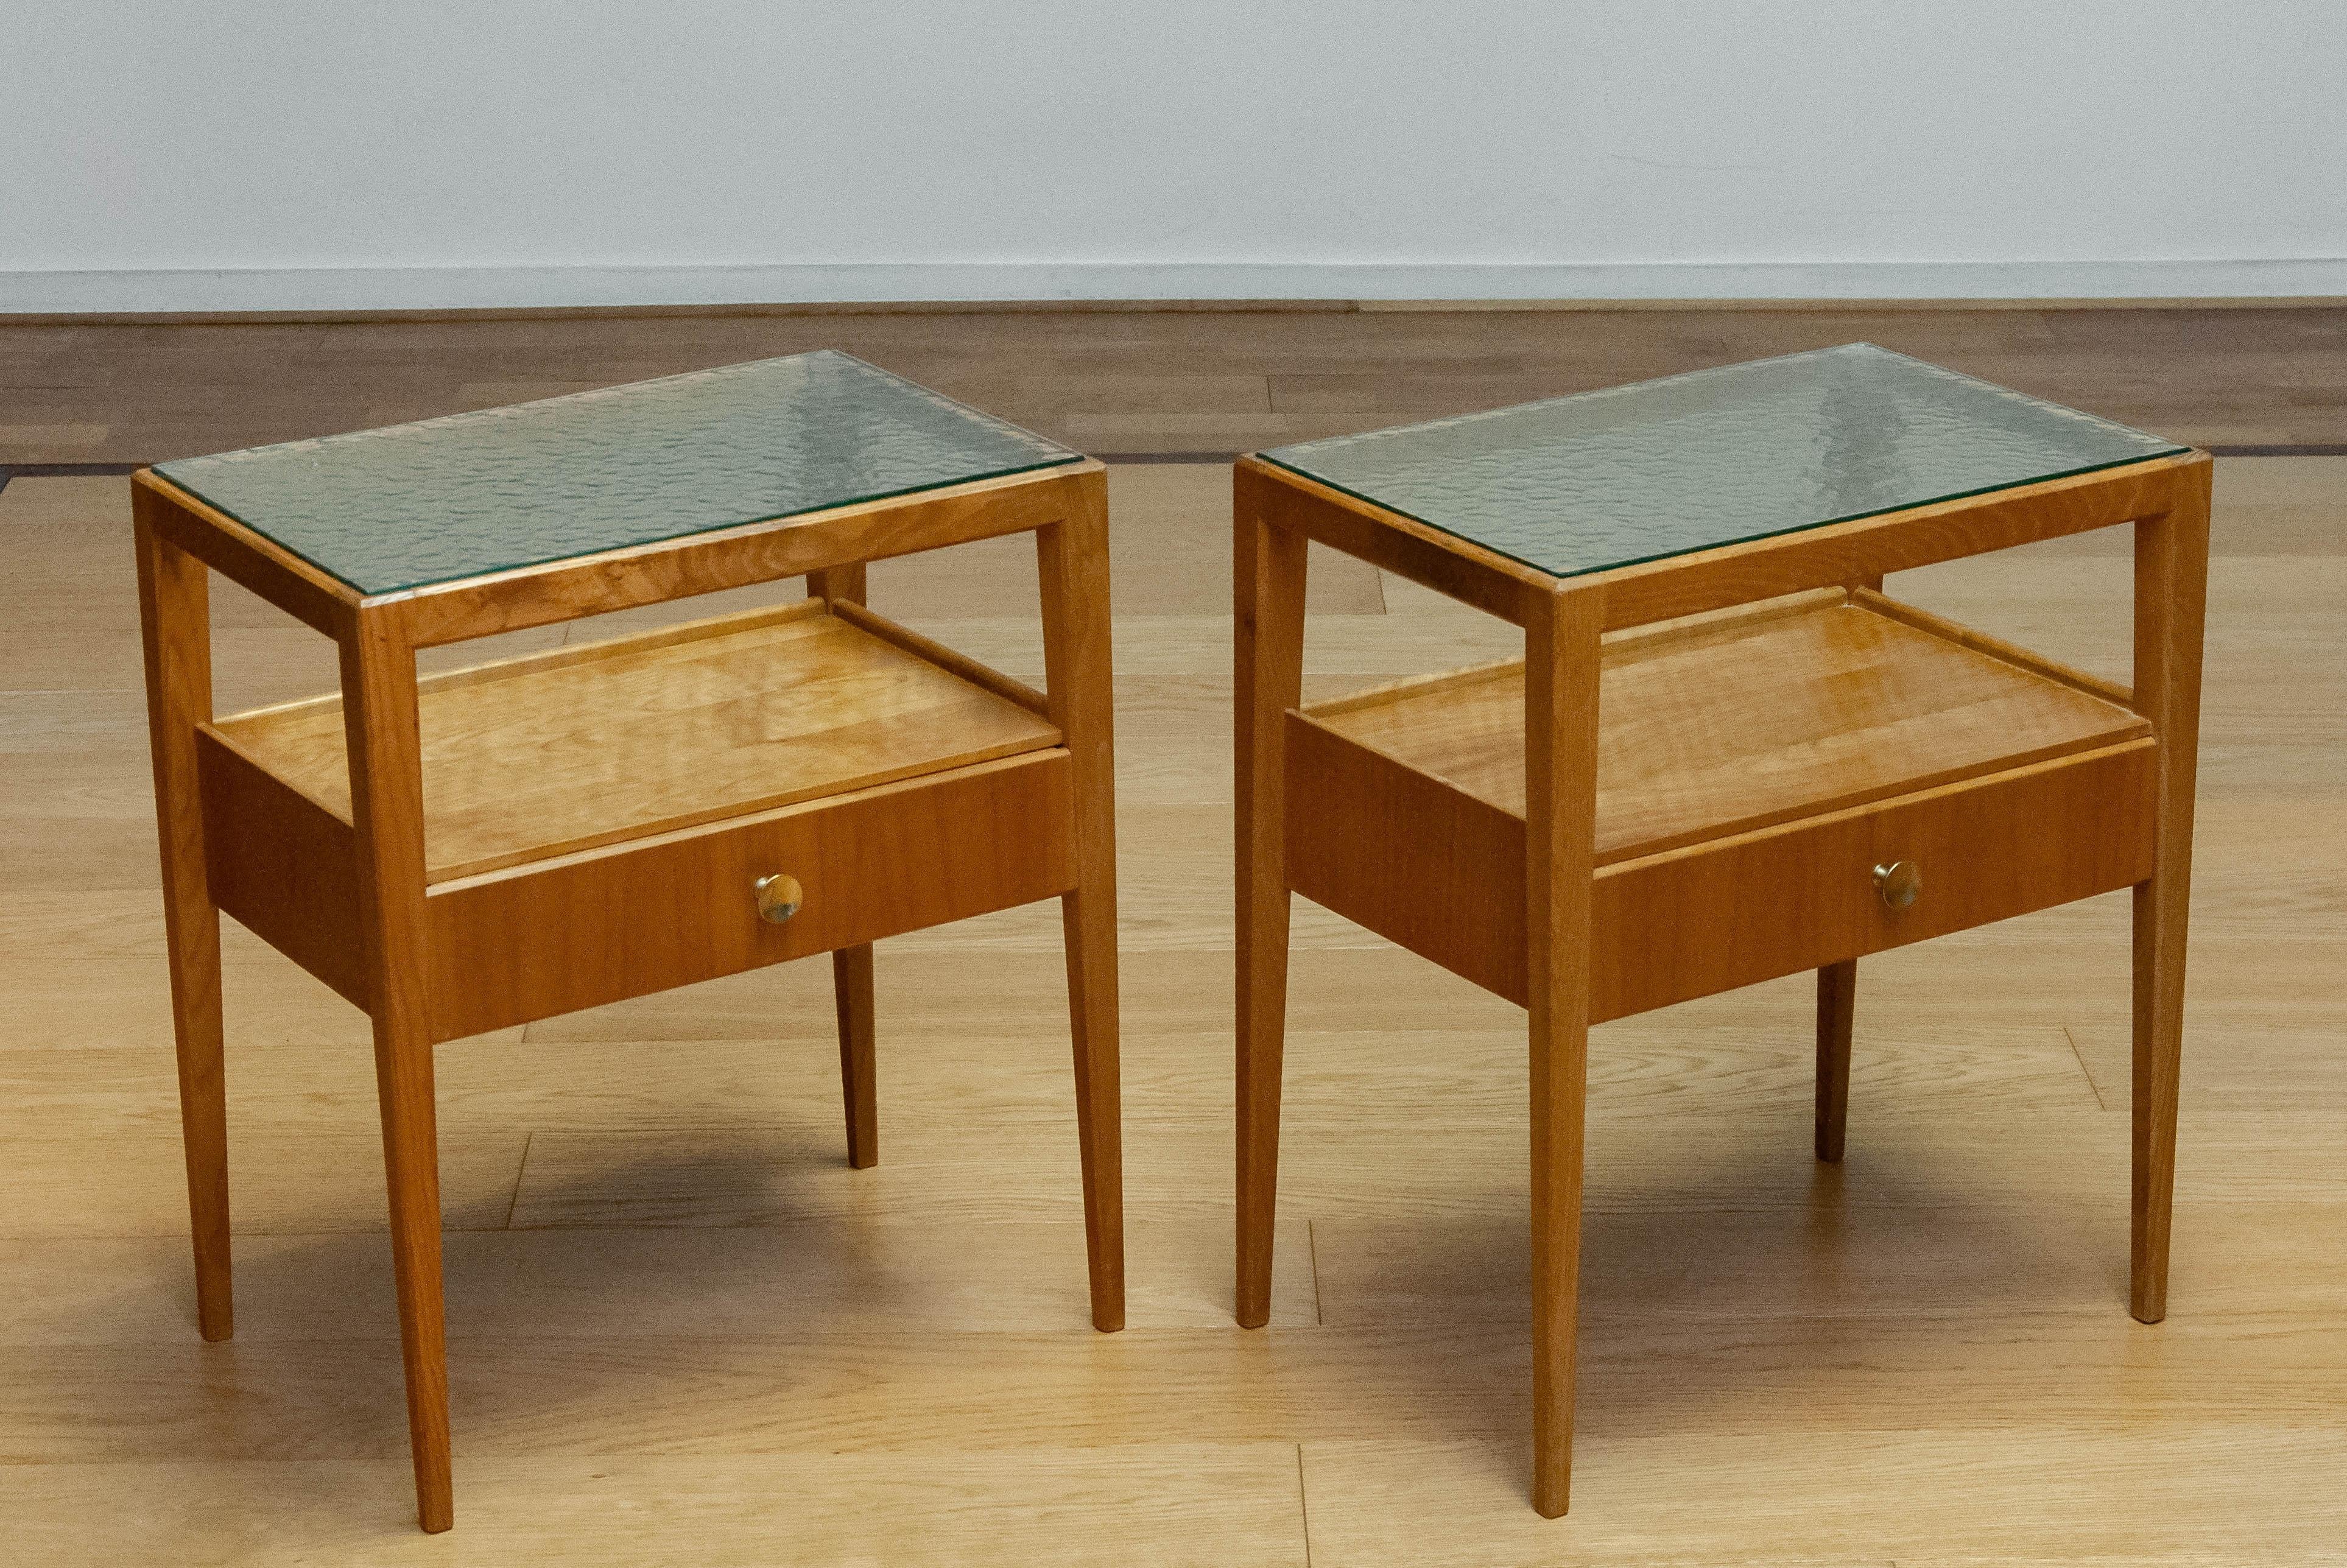 1950s Pair Bedside Tables In Elm With Glass Top By Carl-Axel Acking For Bodafors For Sale 2